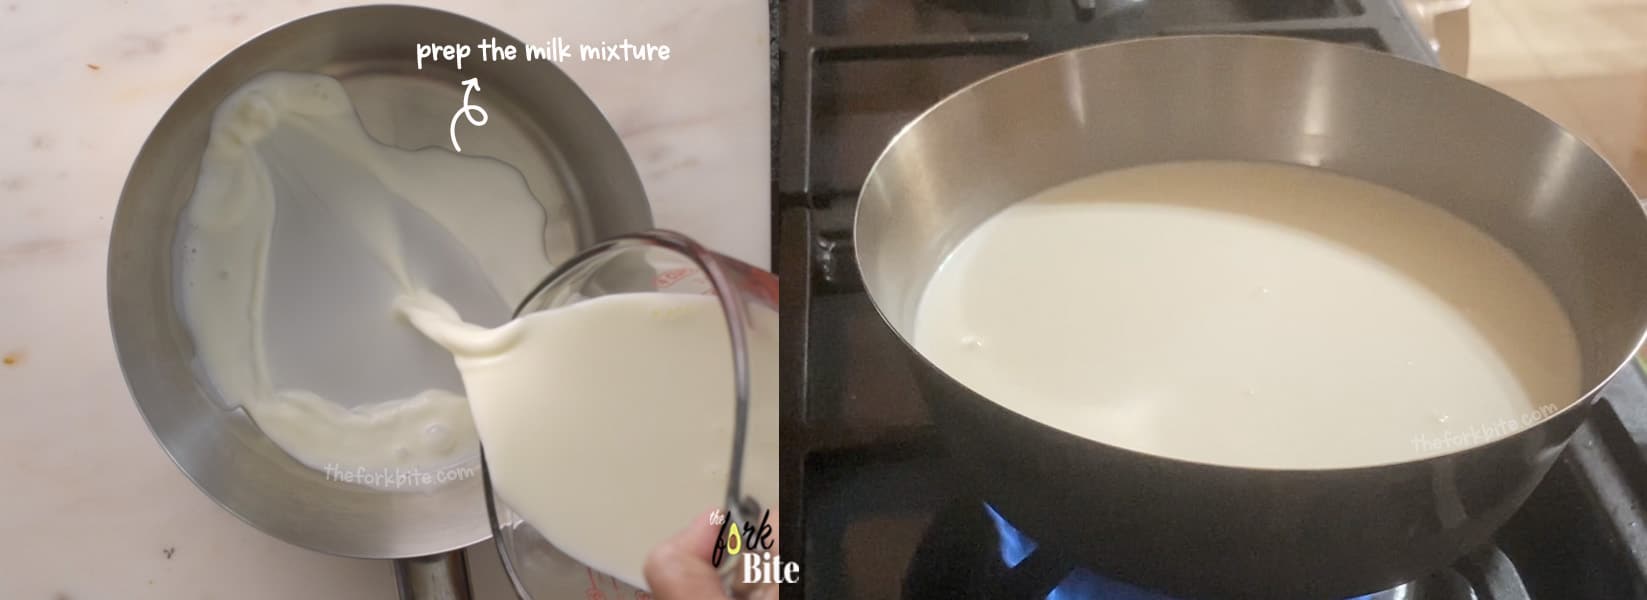 Put milk, heavy cream, sugar, vanilla extract, and a pinch of salt in a saucepan, keep stirring the mixture to help dissolve the sugar completely.